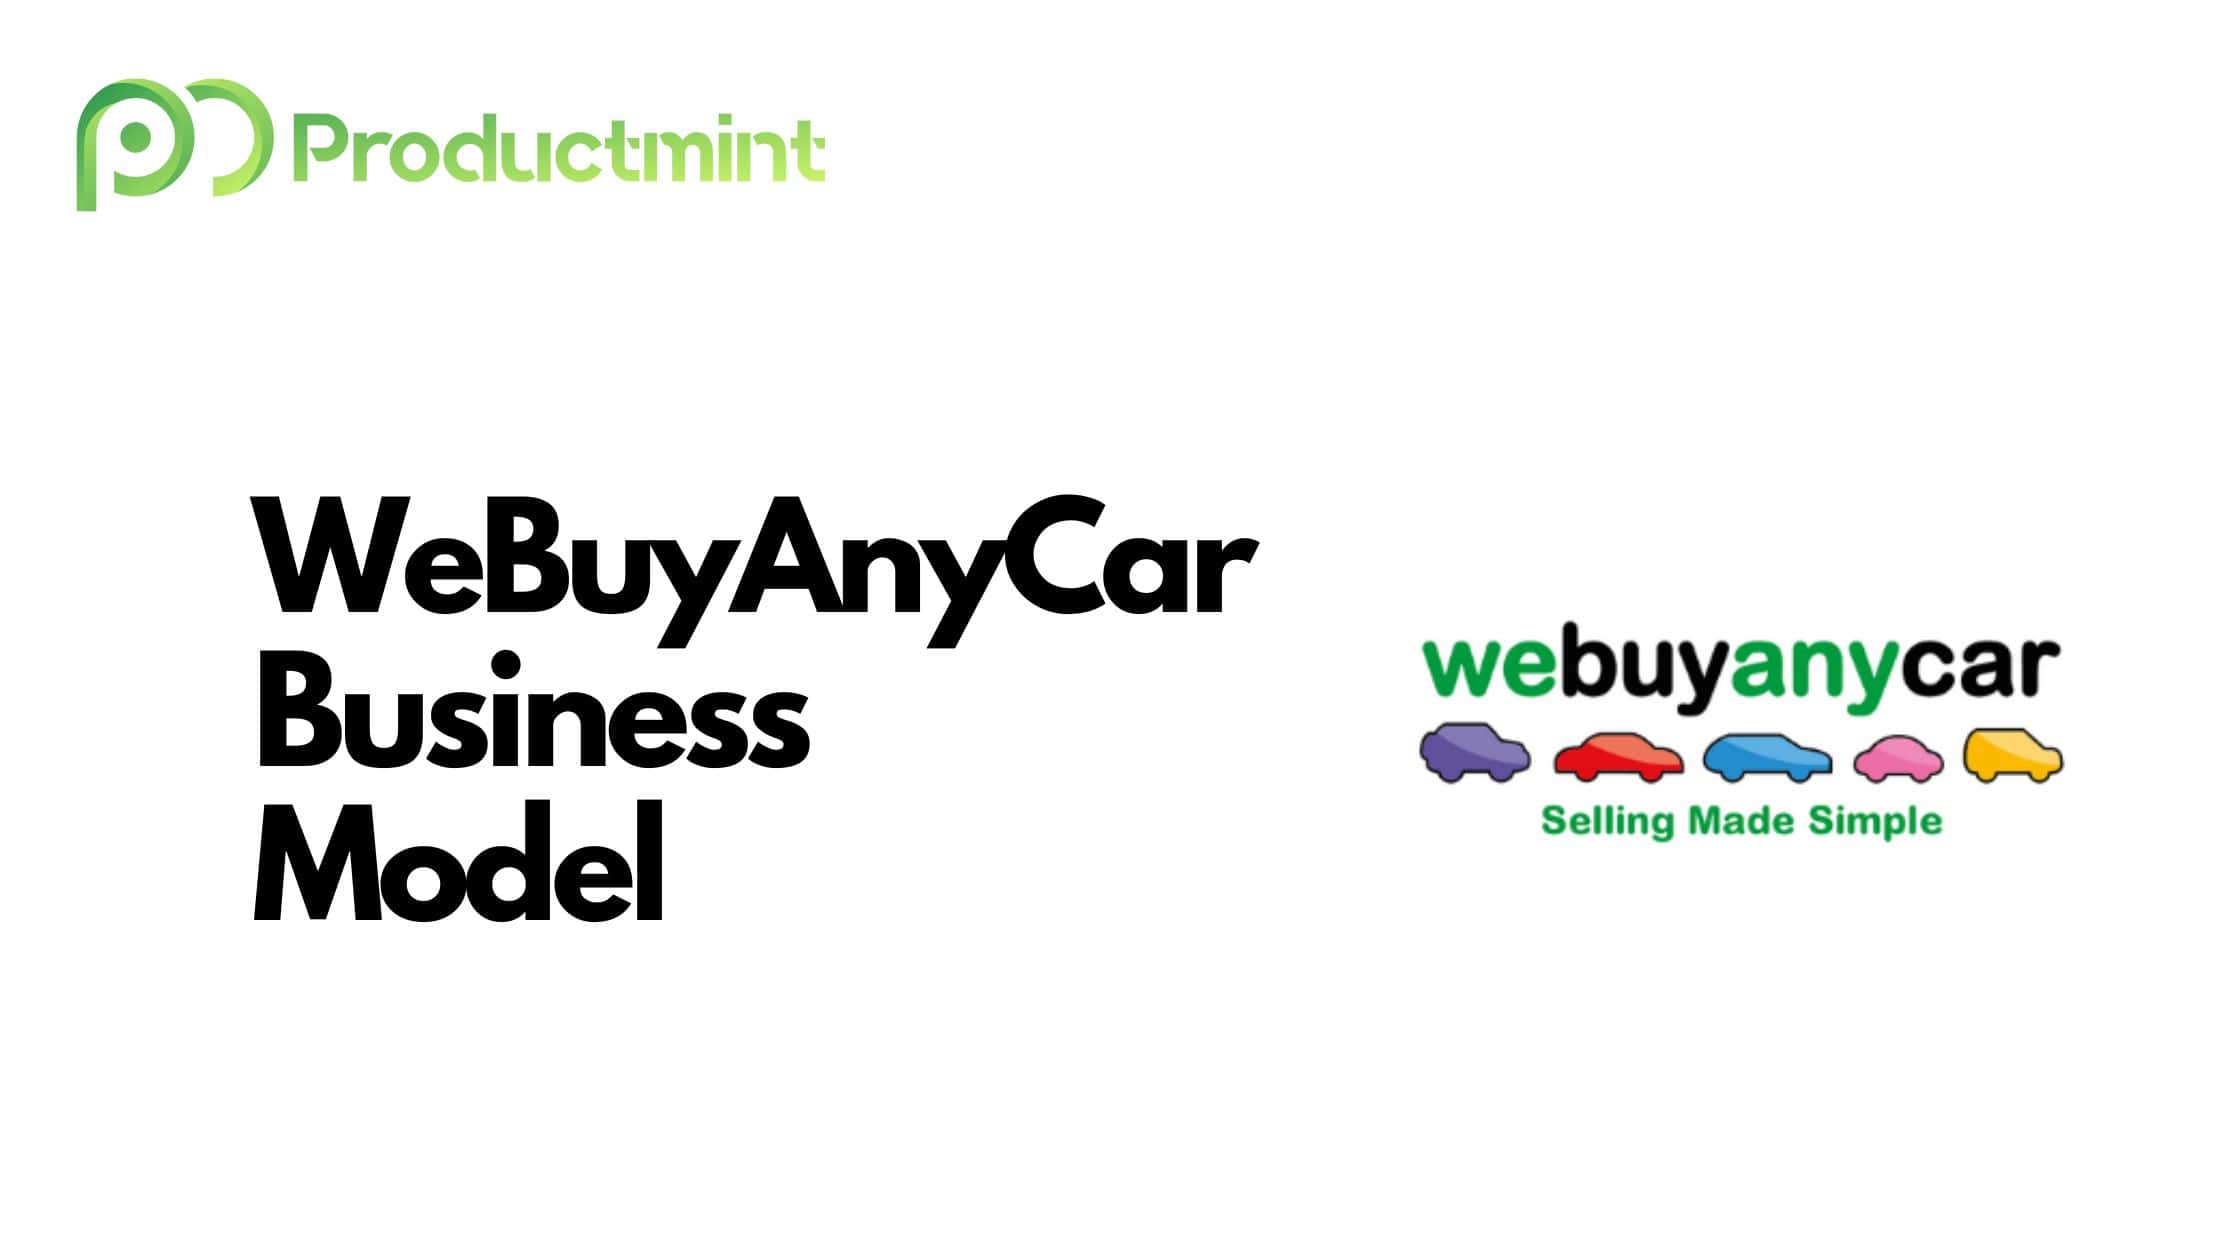 We Buy Any Car Business Model